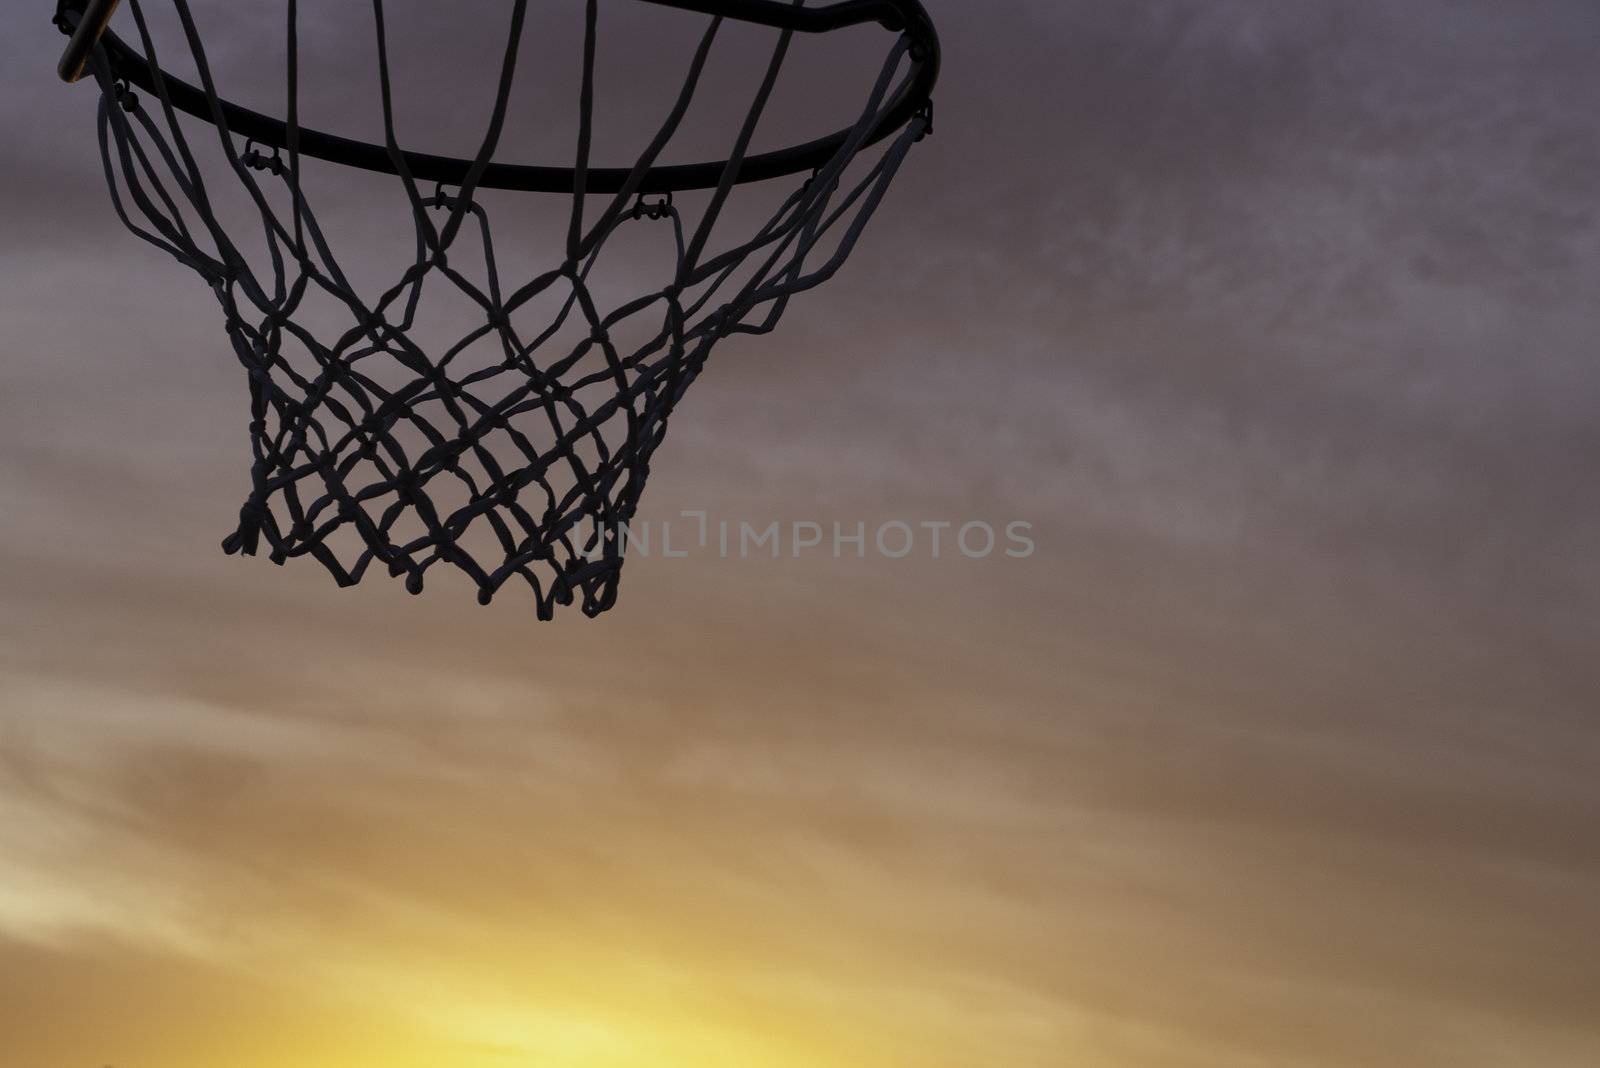 basketball hoop silhouette with an orange sunset